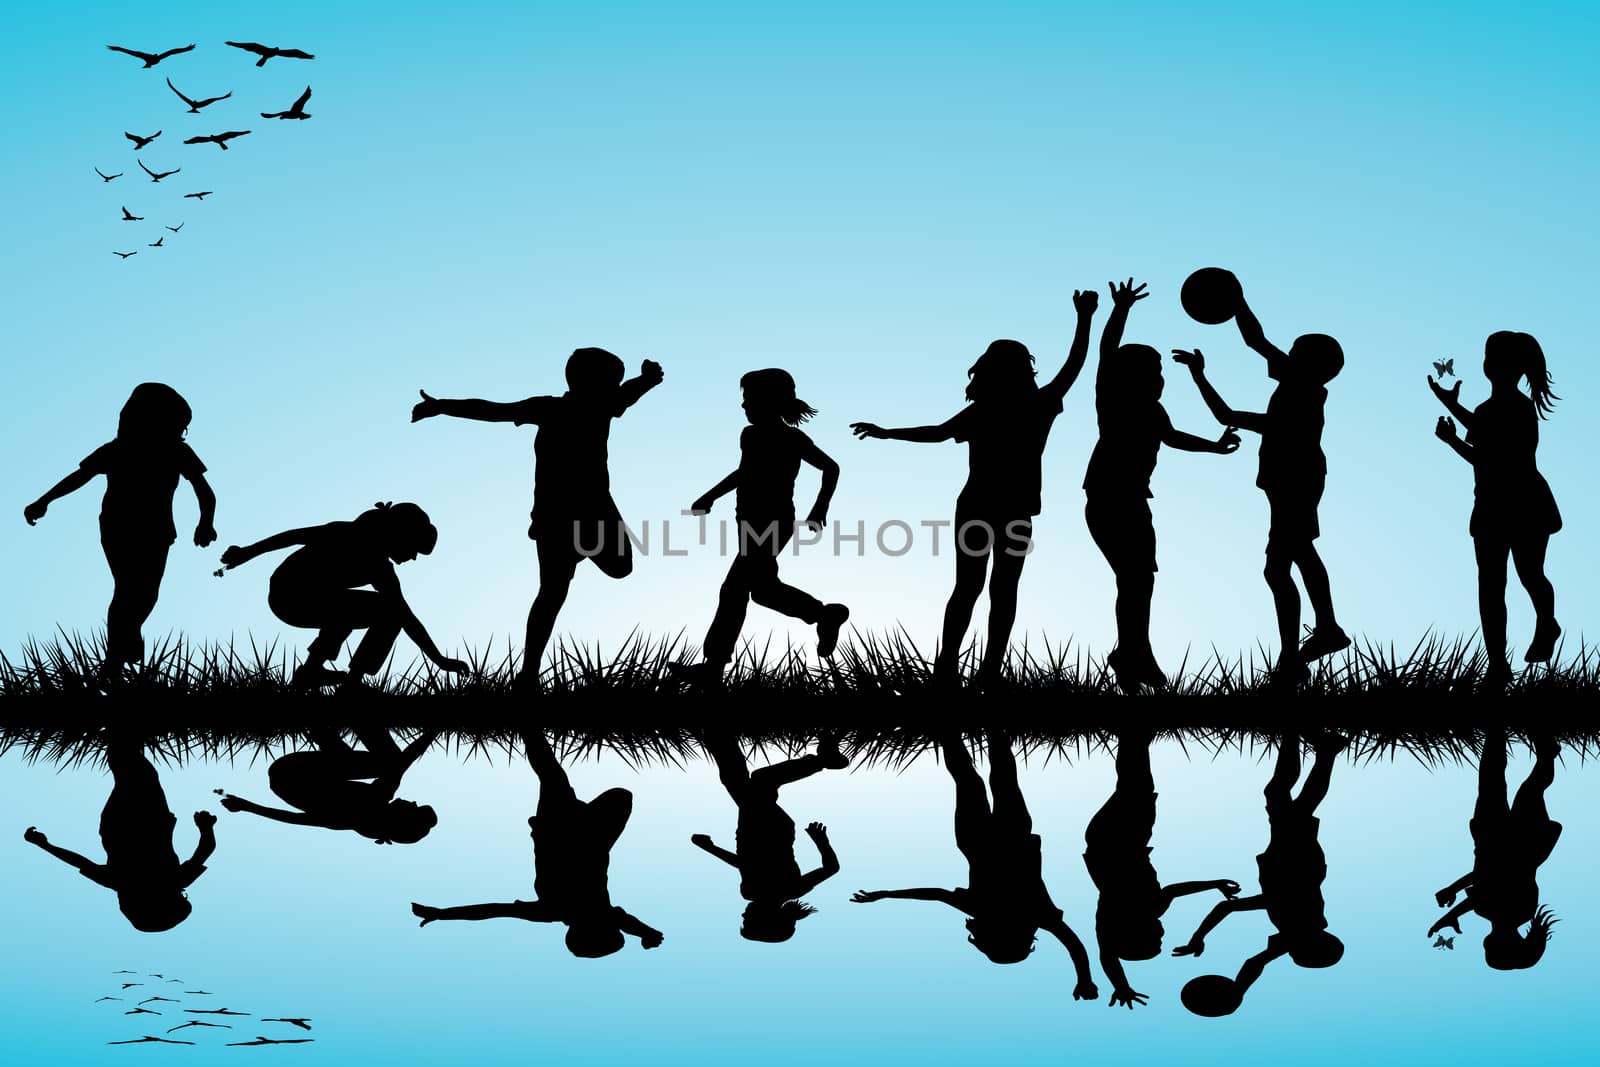 Group of children silhouettes playing outdoor by hibrida13